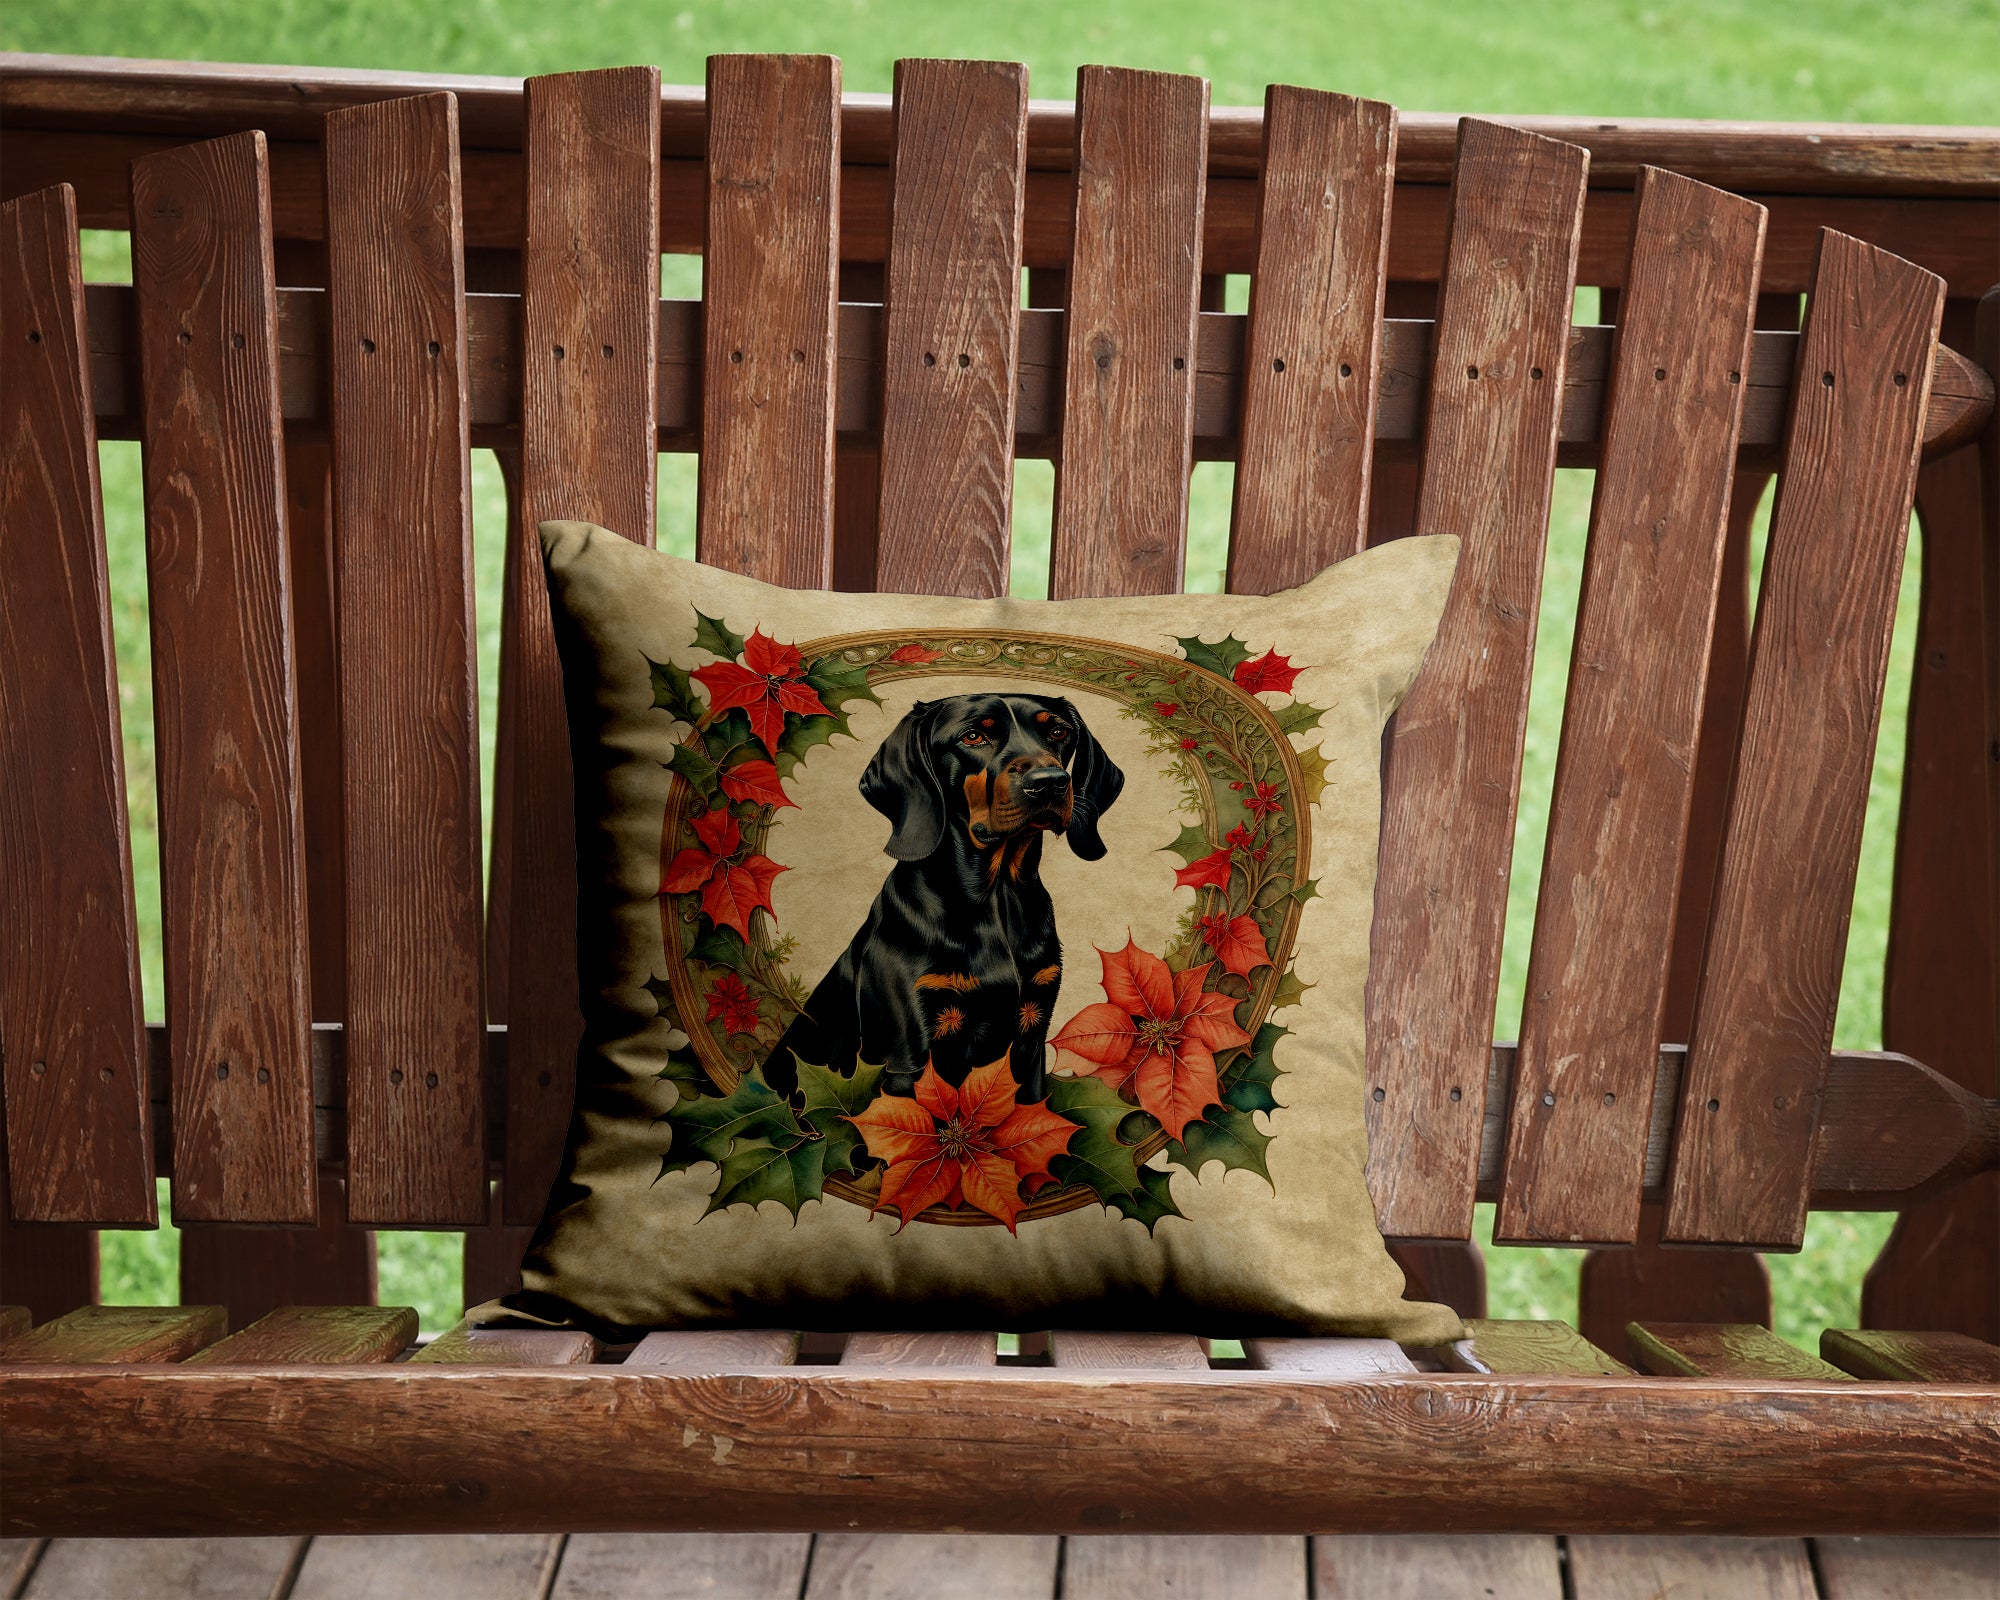 Buy this Black and Tan Coonhound Christmas Flowers Throw Pillow